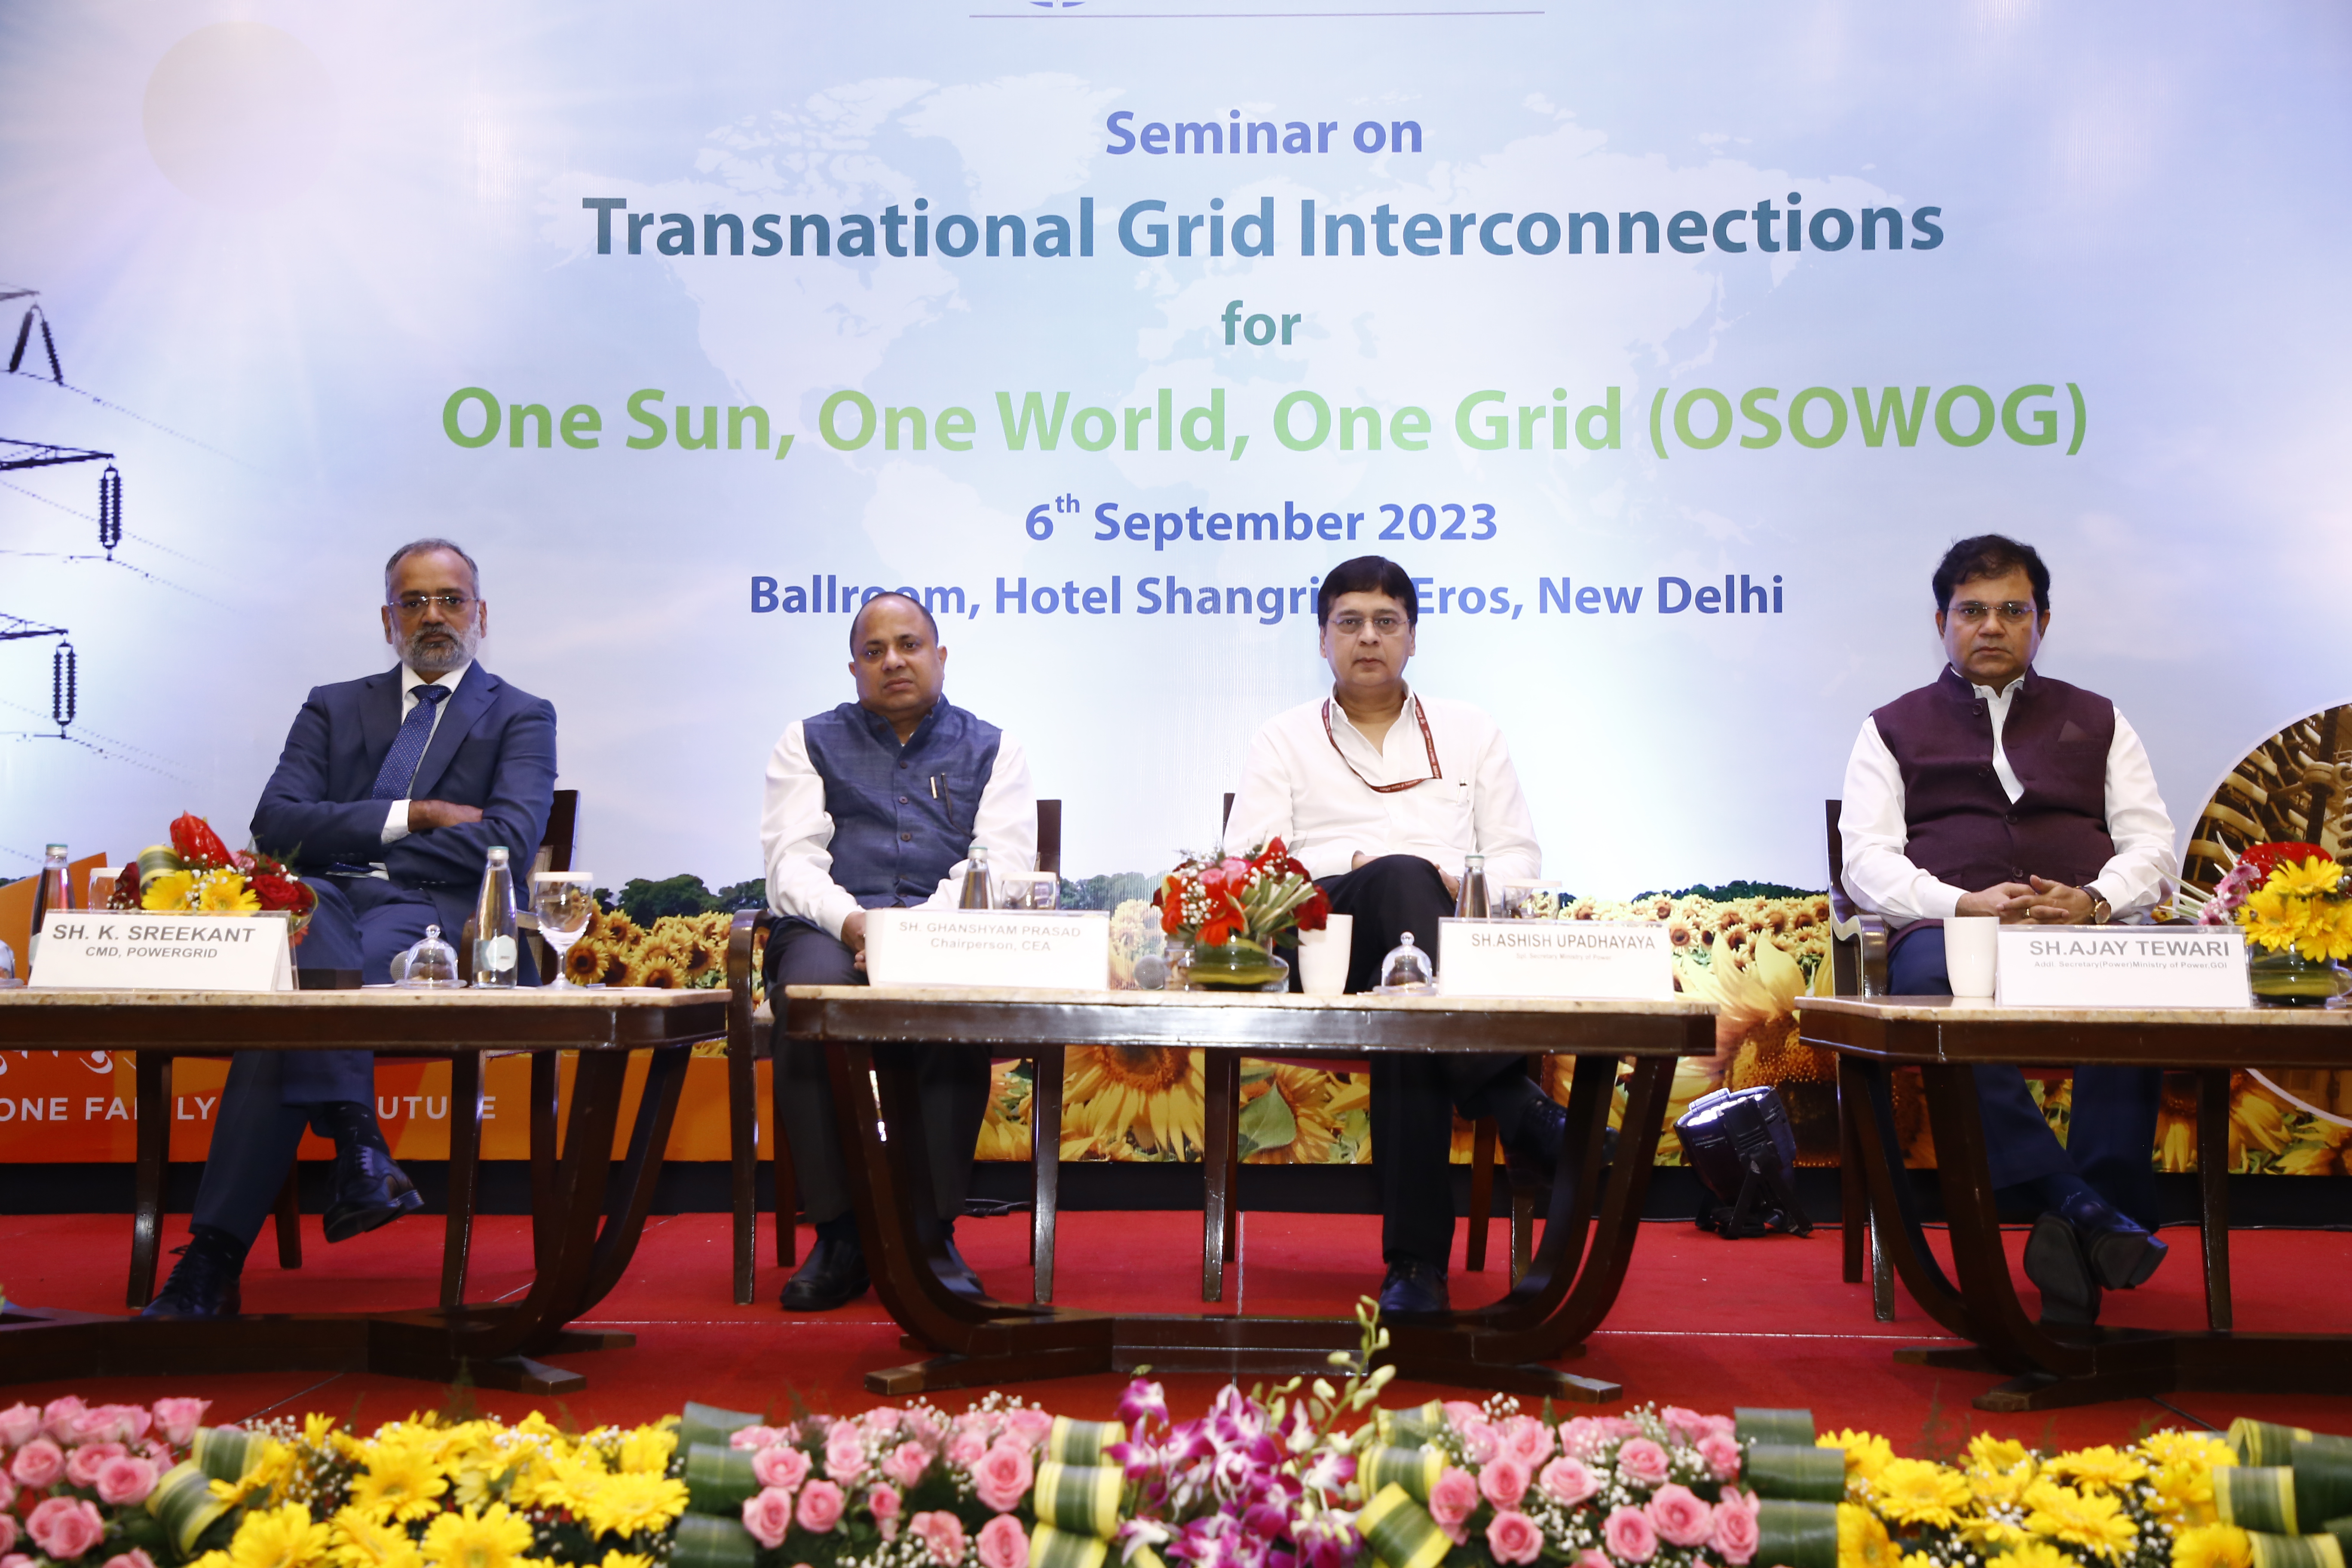 POWERGRID organises seminar on Transnational Grid Interconnections for One Sun One World One Grid